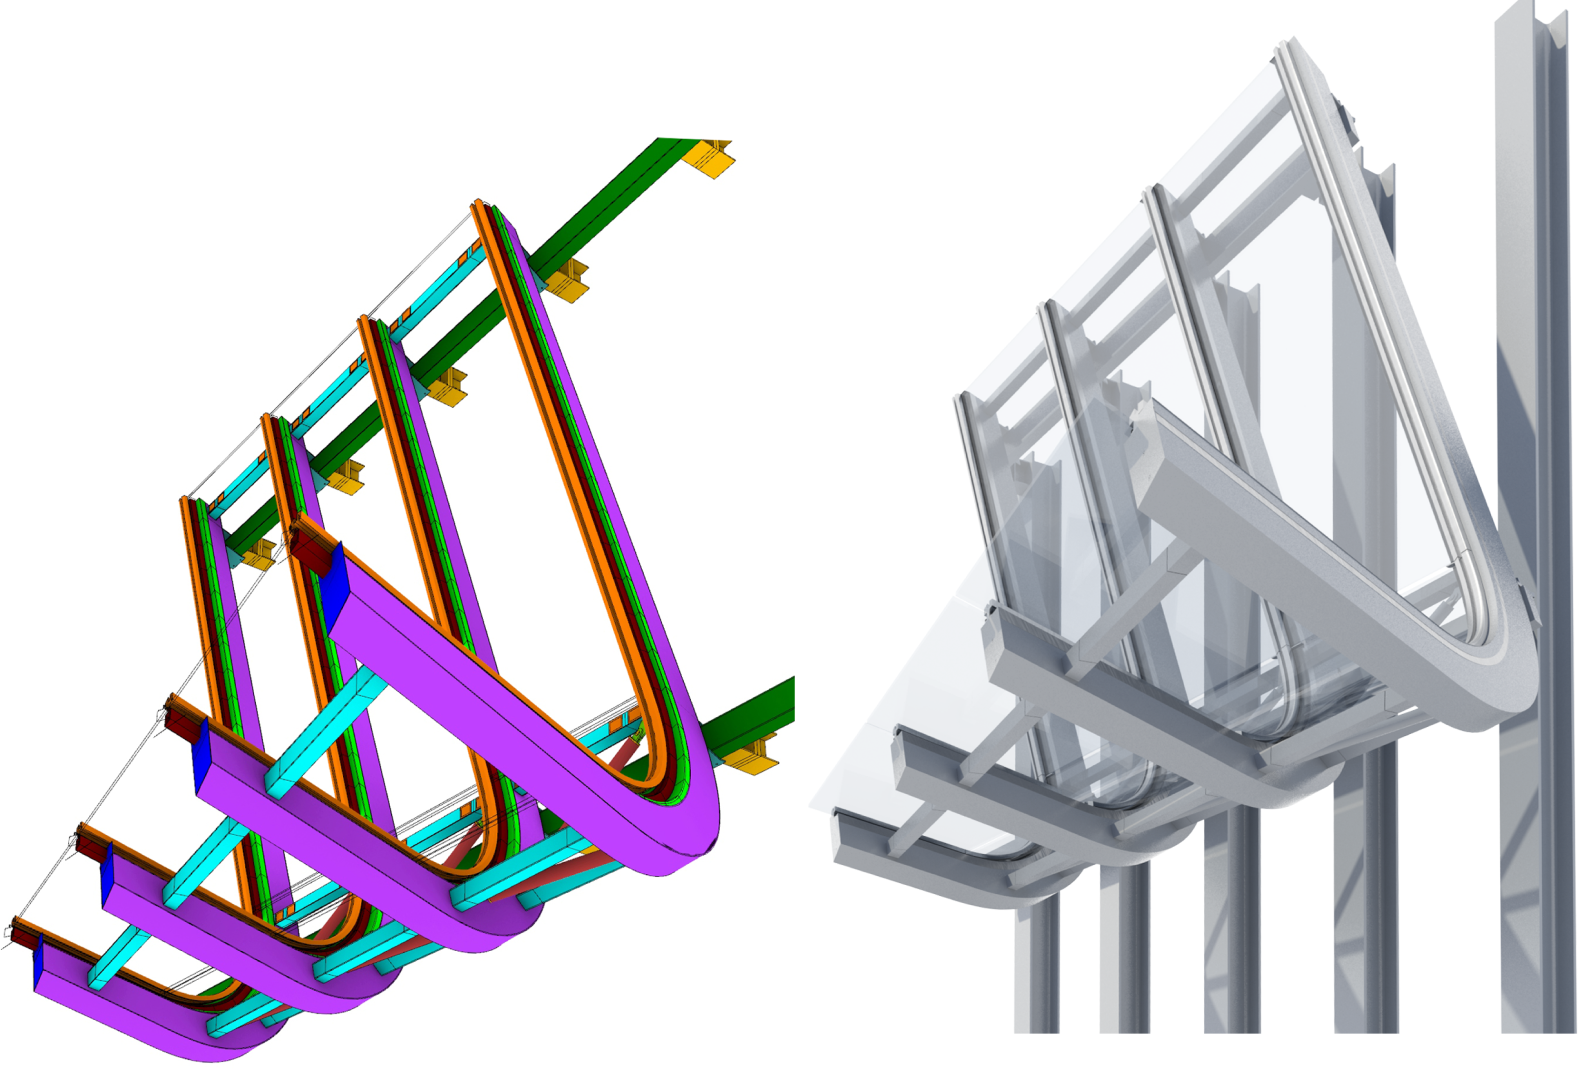 Parametric 3D shop planning model for a curved steel-glass canopy